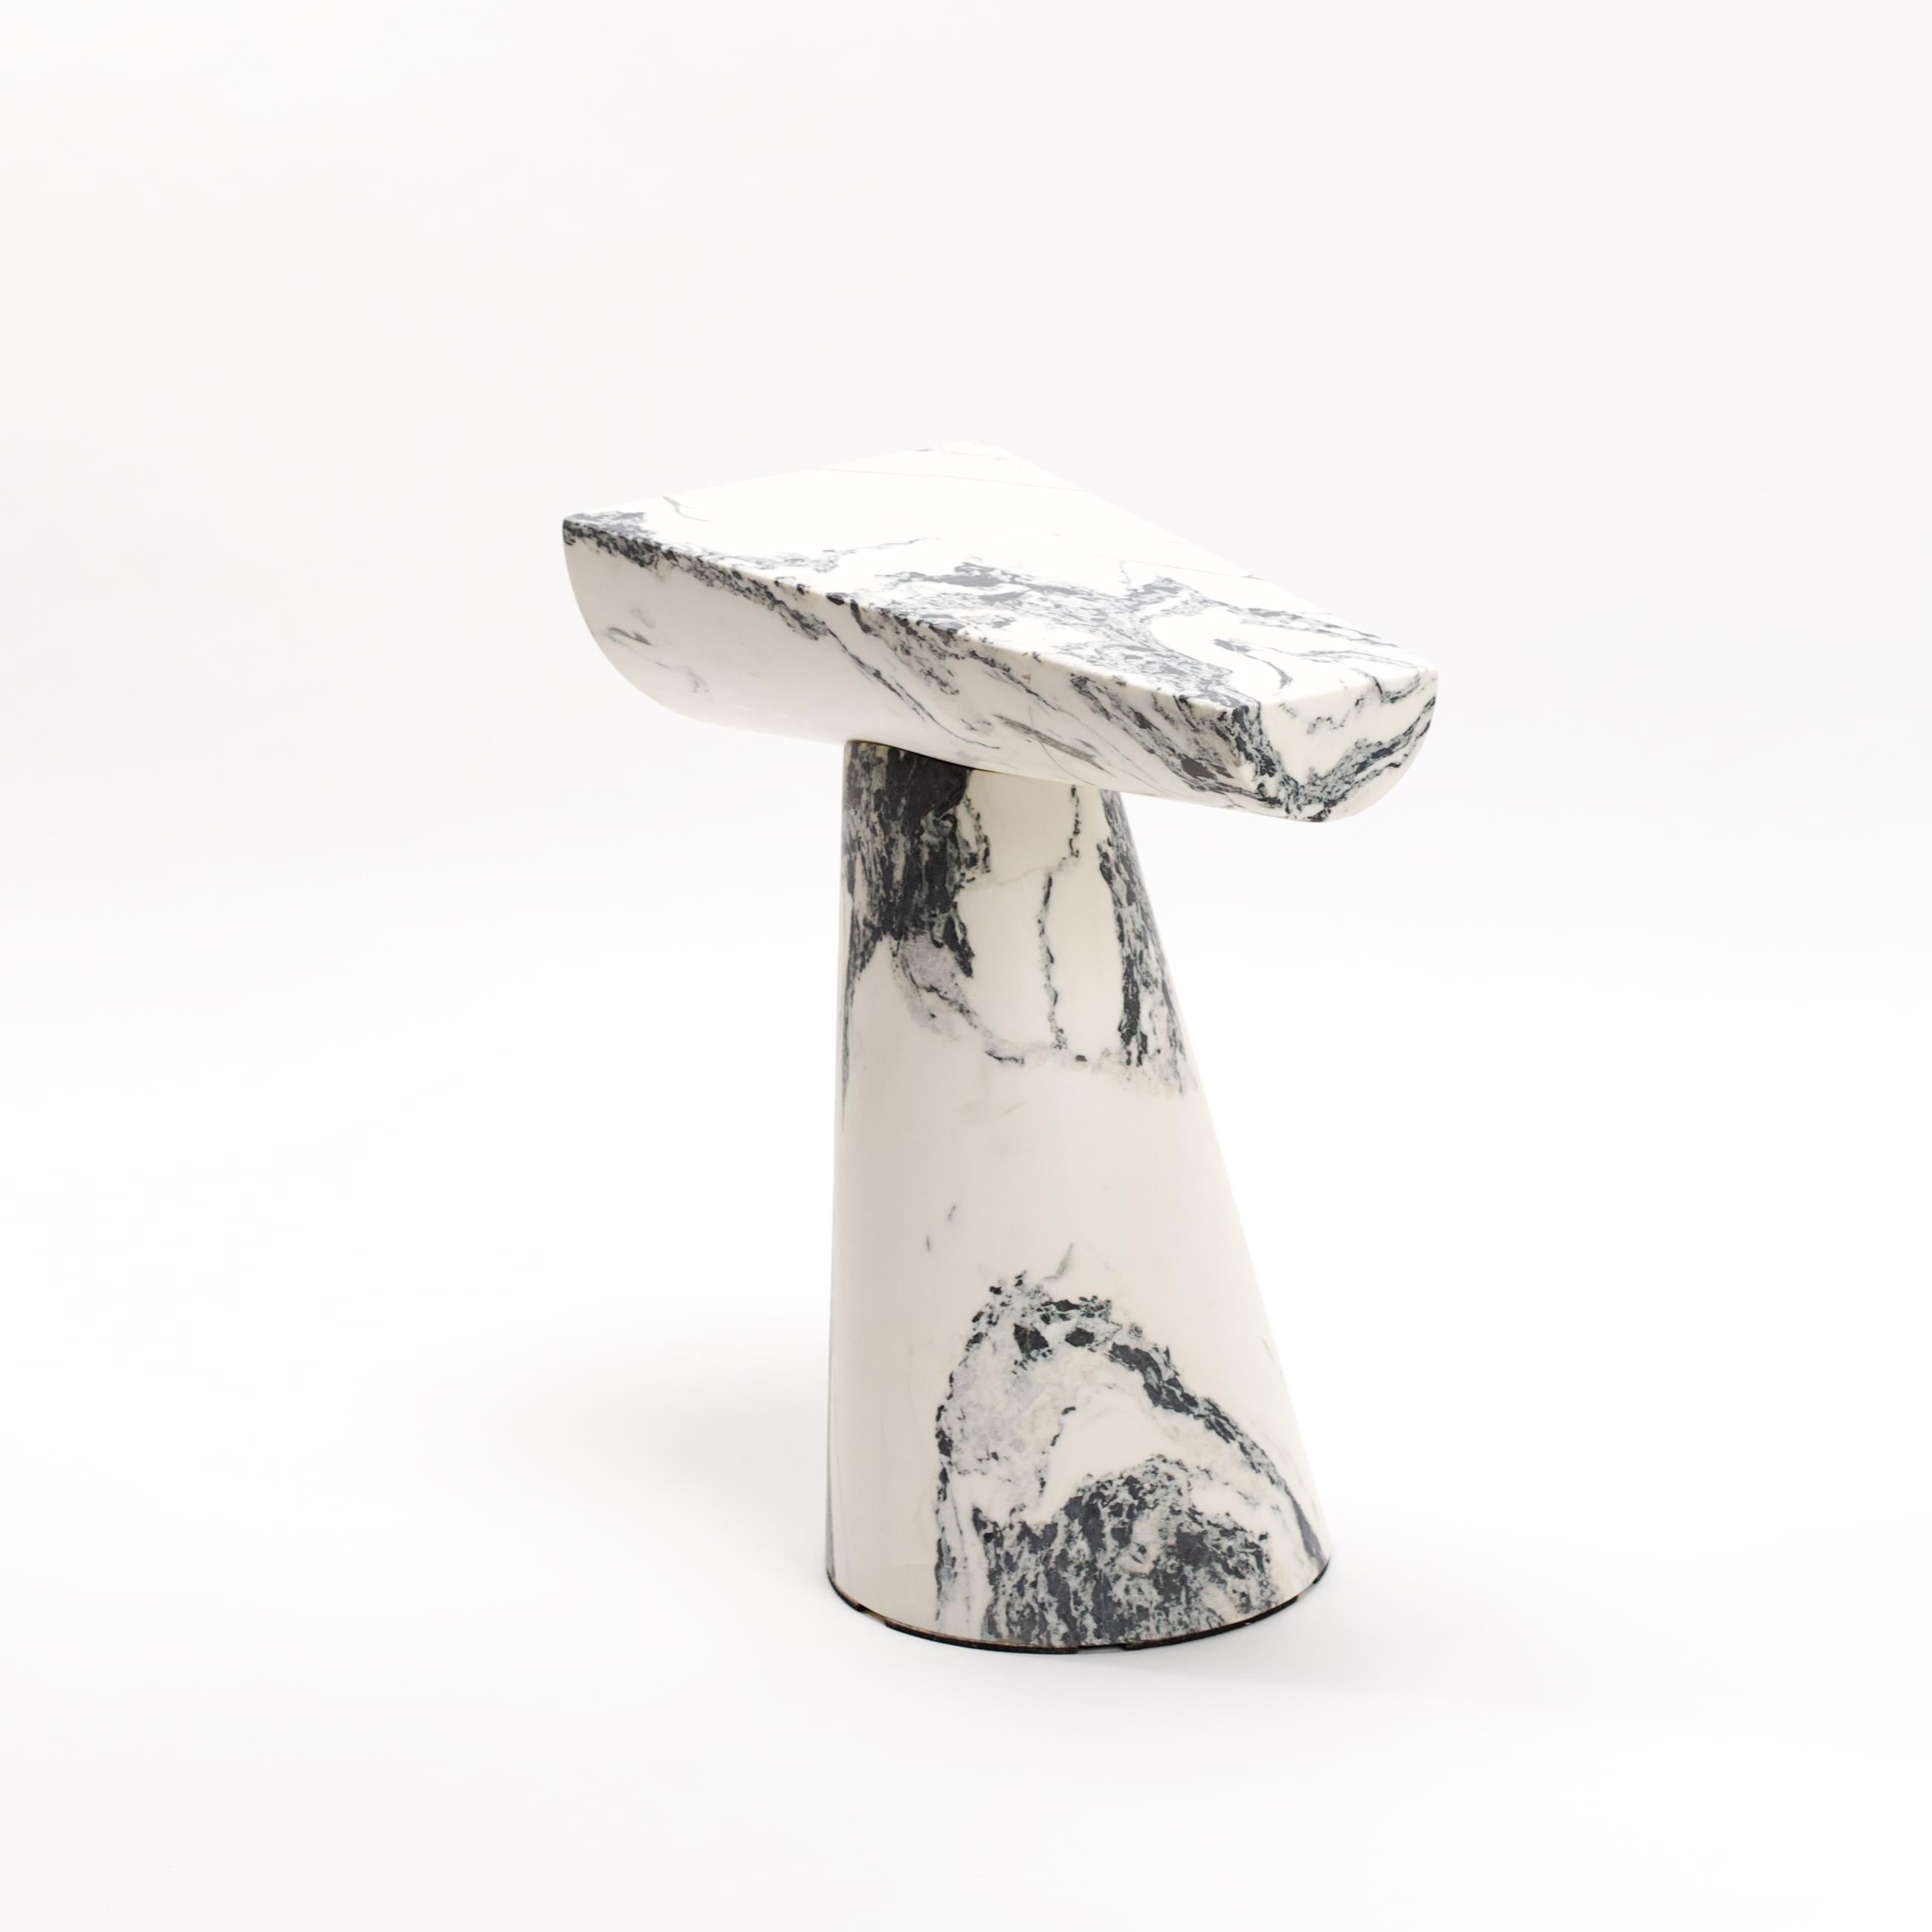 More Side Table by Studio Yolk
Dimensions: W 24 x D 48 x H 48 cm
Materials: Arabescato Carrara Marble

